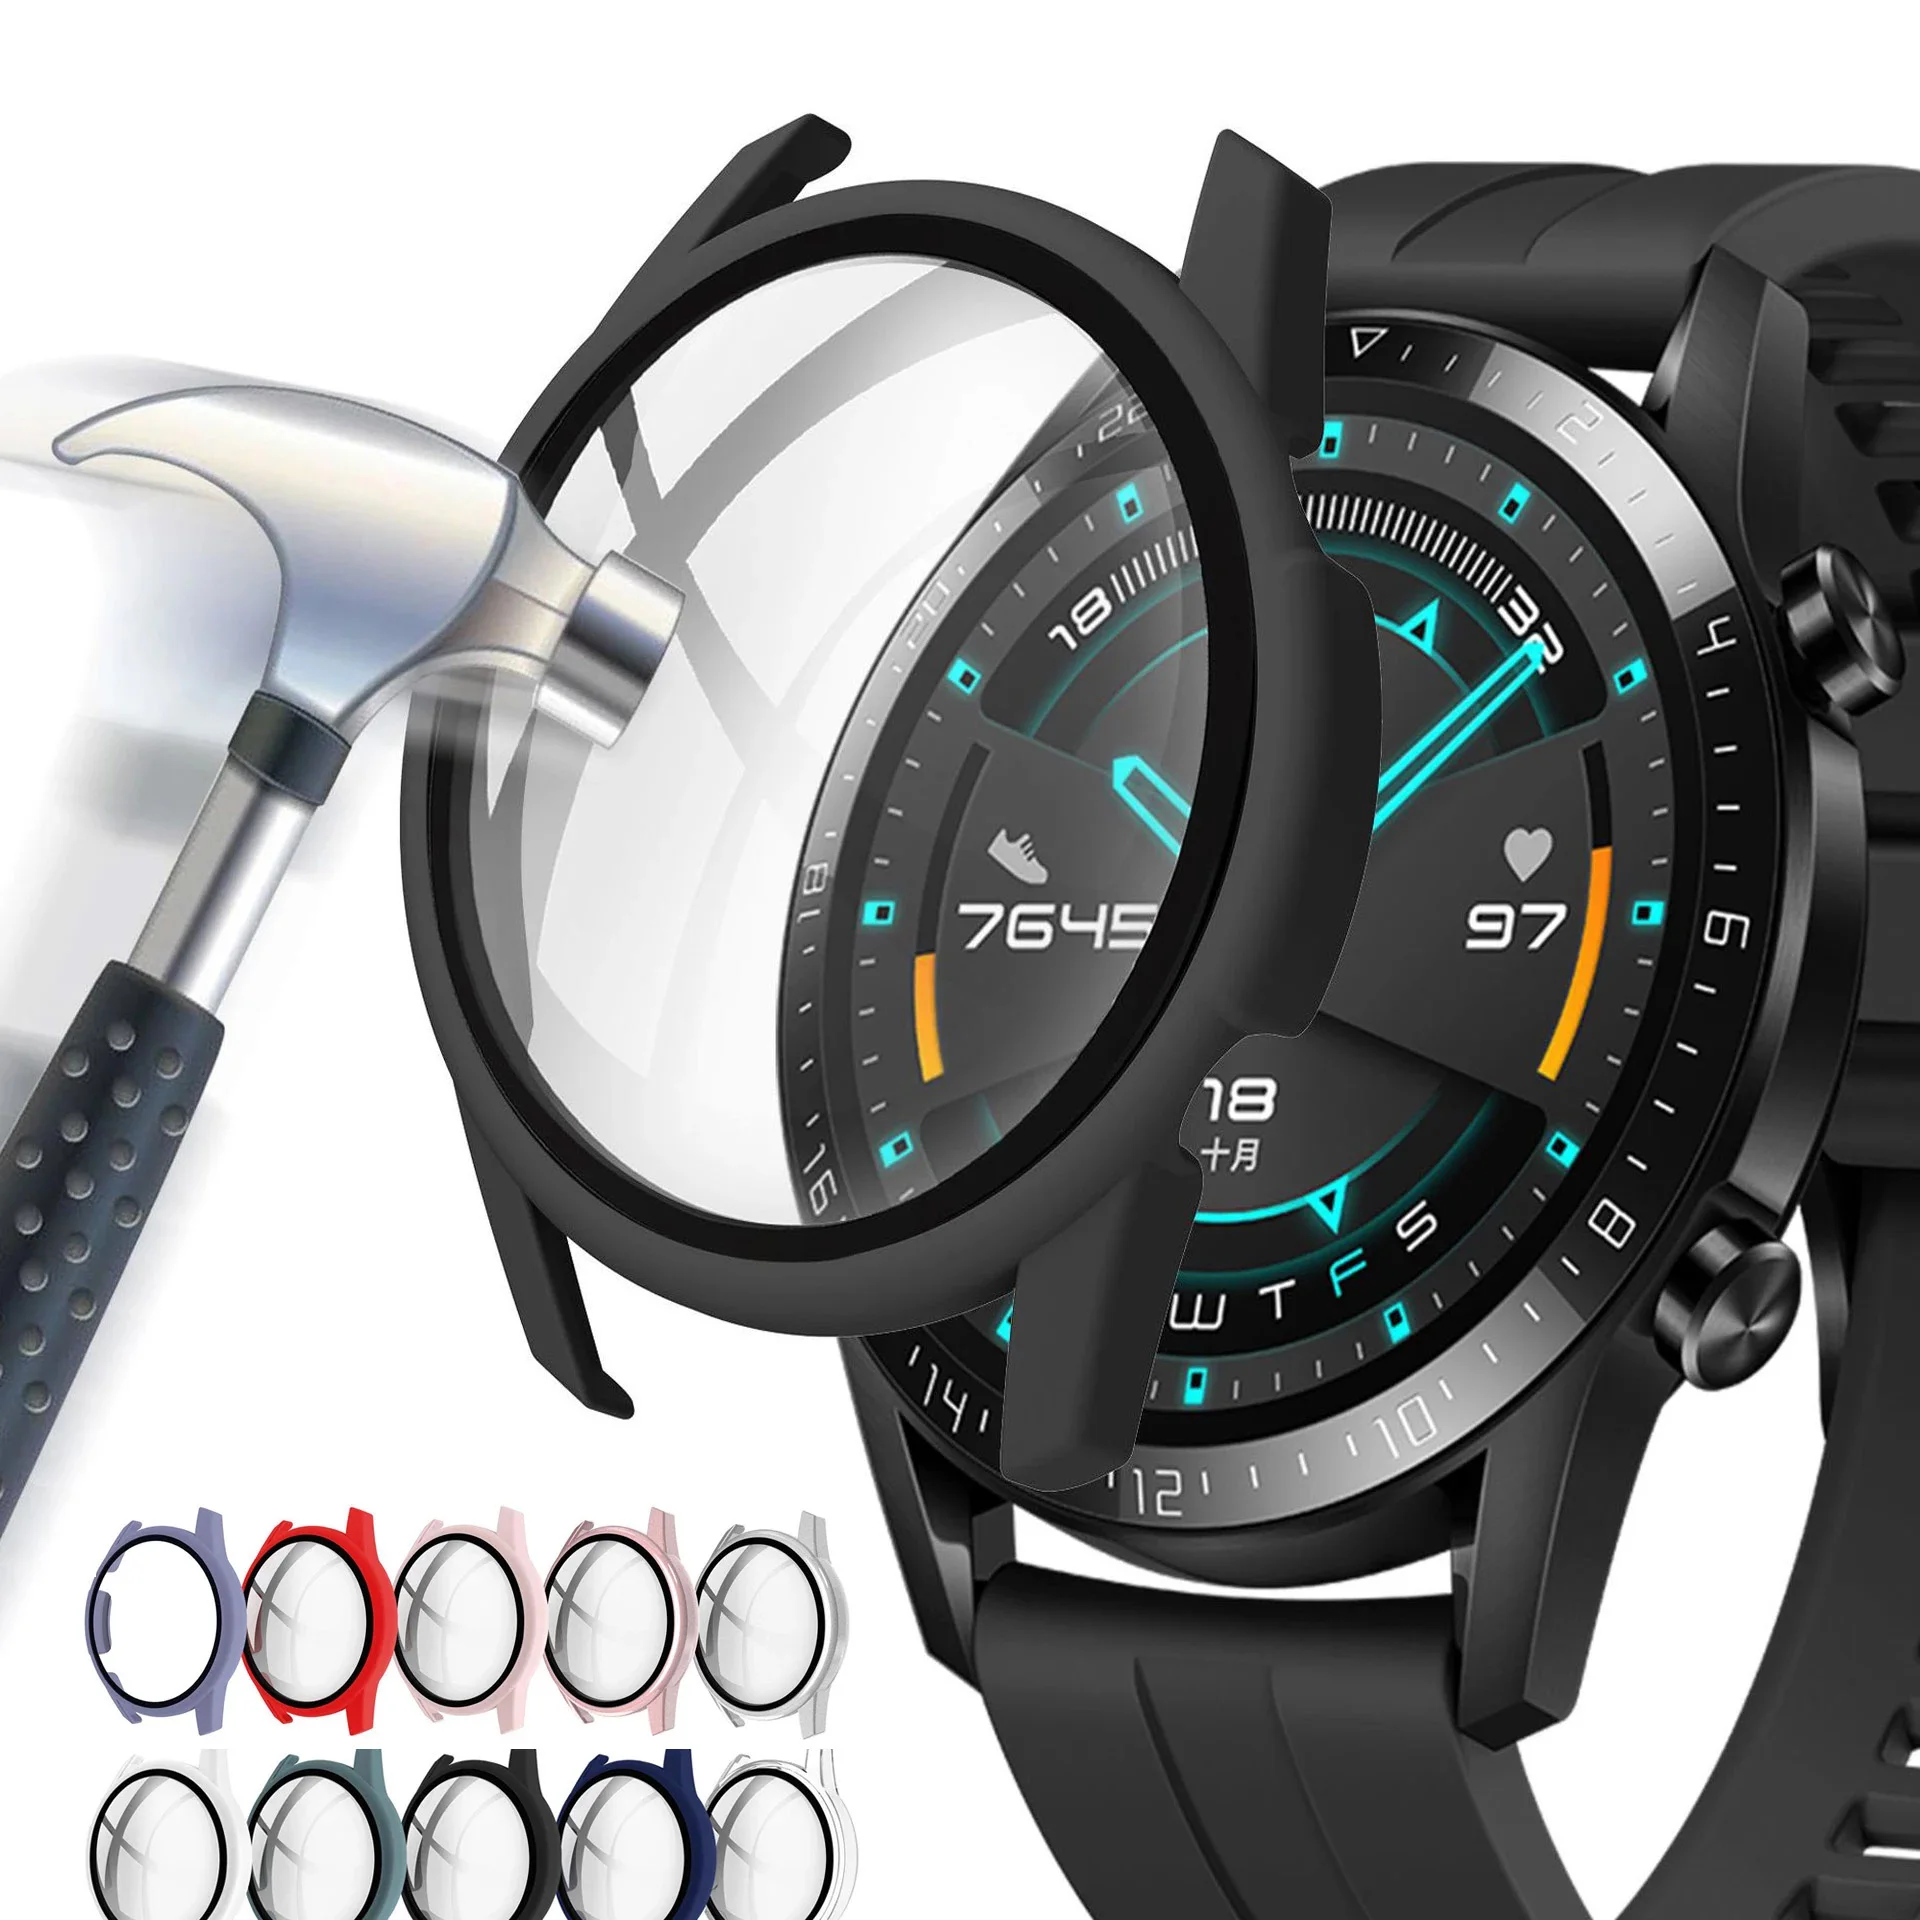 

Glass+Case for huawei watch gt2 2e 46mm 42mm Accessories Full Coverage Screen Bumper Tempered correa huawei gt2e Cover protector